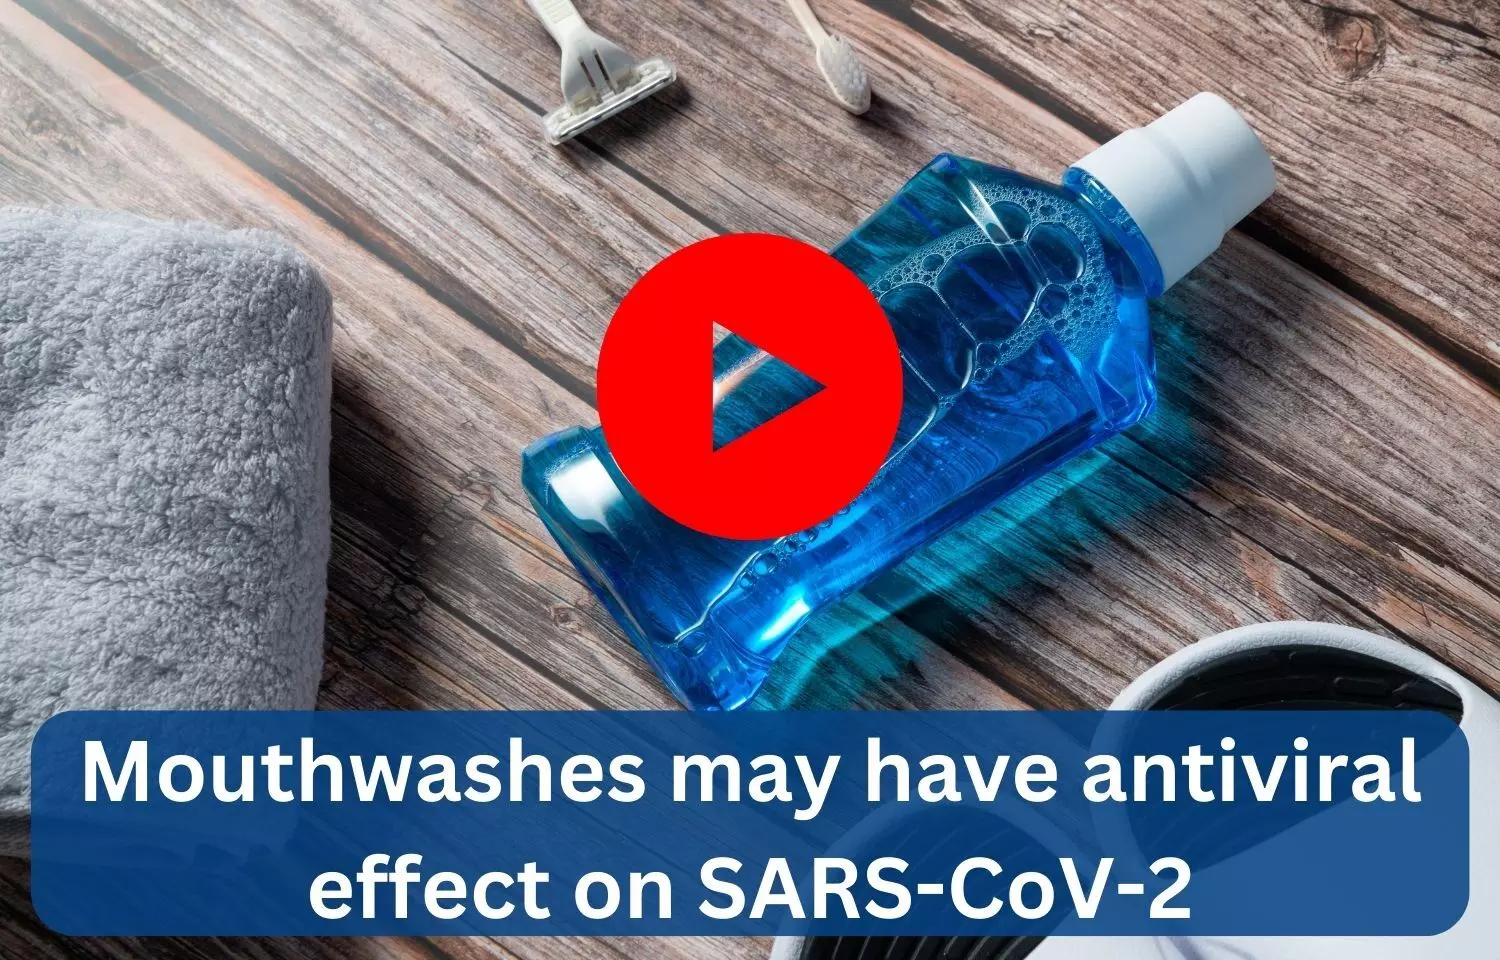 Mouthwashes may have antiviral effect on SARS-CoV-2